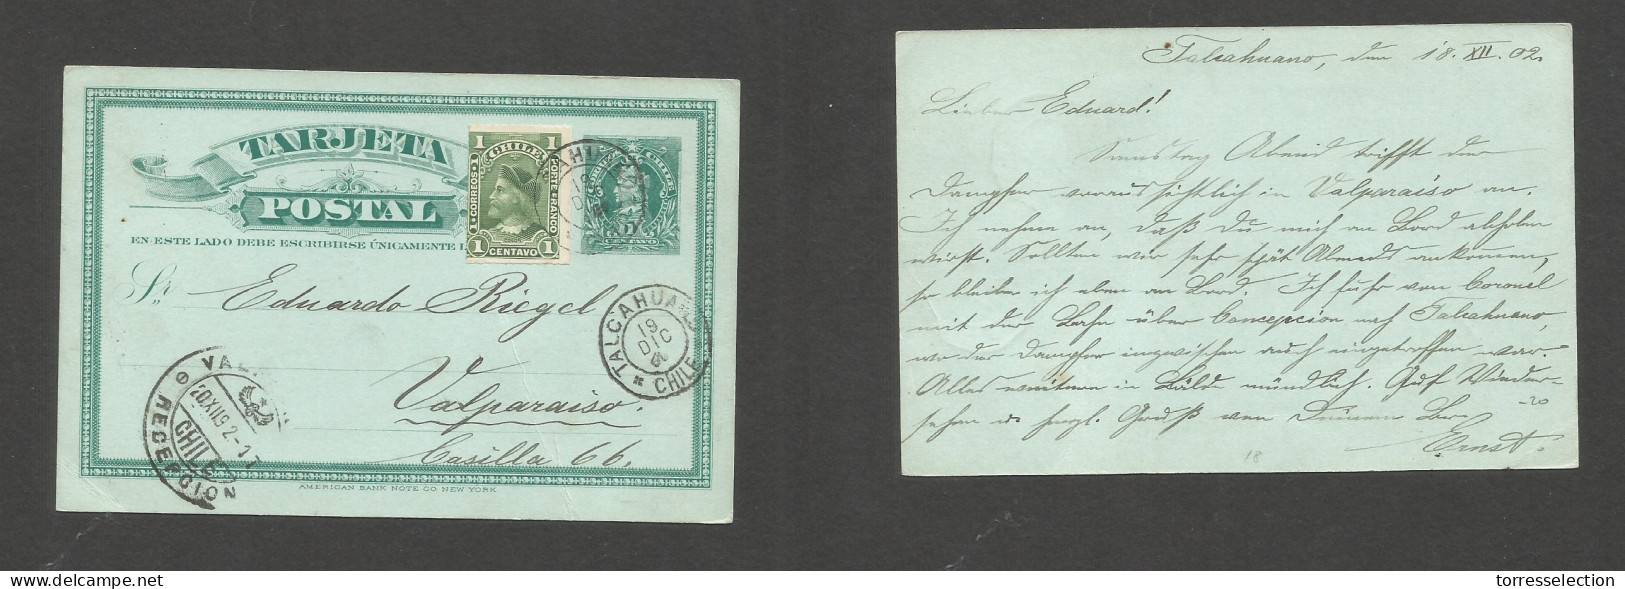 CHILE - Stationery. 1902 (18 Dec) Talcahuano - Valp (20 Dec) 1c Green Stat Card + 1c Green Vert Adtl, Tied Cds. VF Used  - Cile